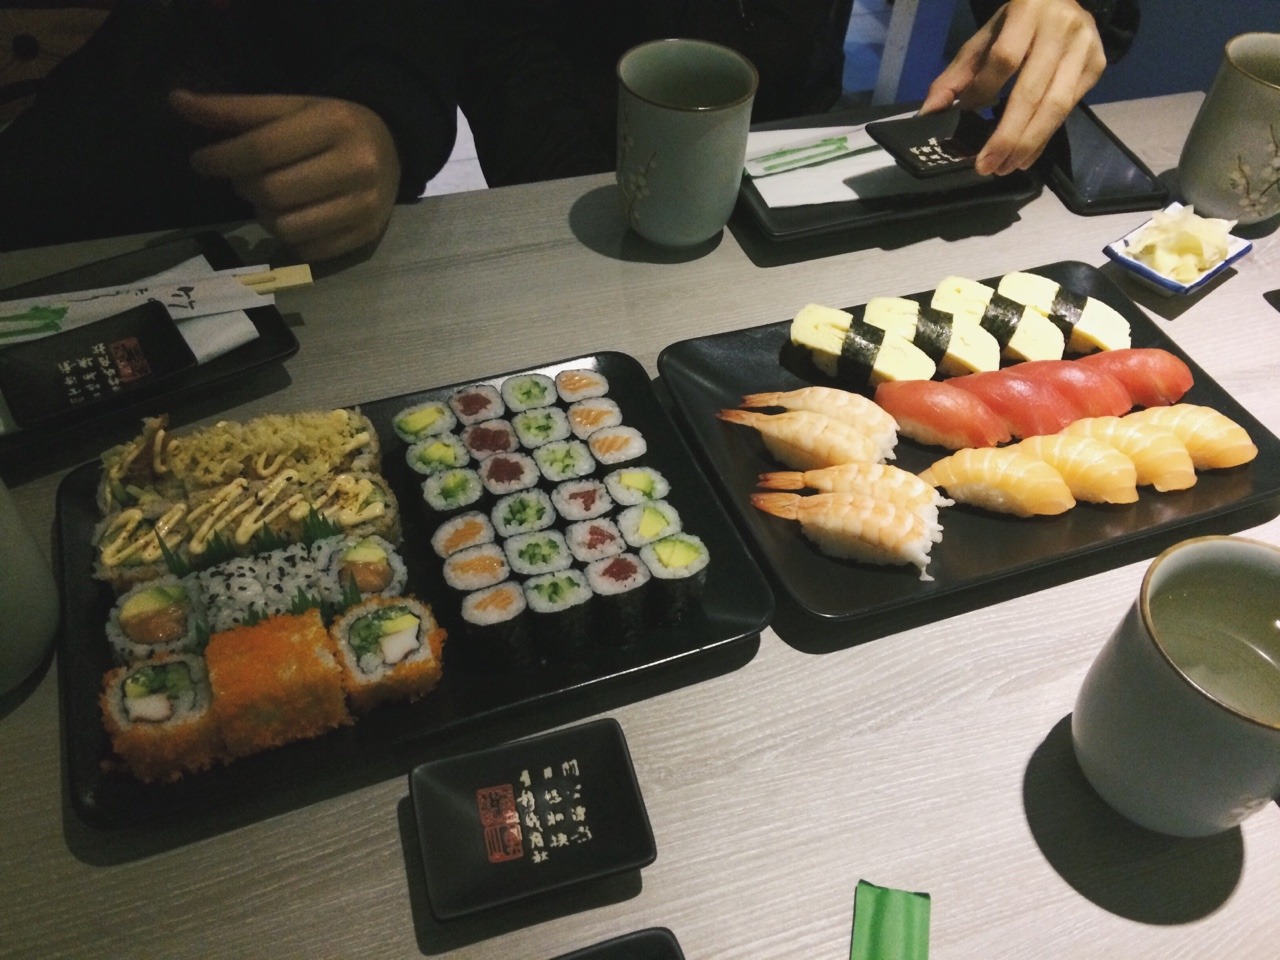 We had authentic sushi for lunch. Humans are such predictable creatures